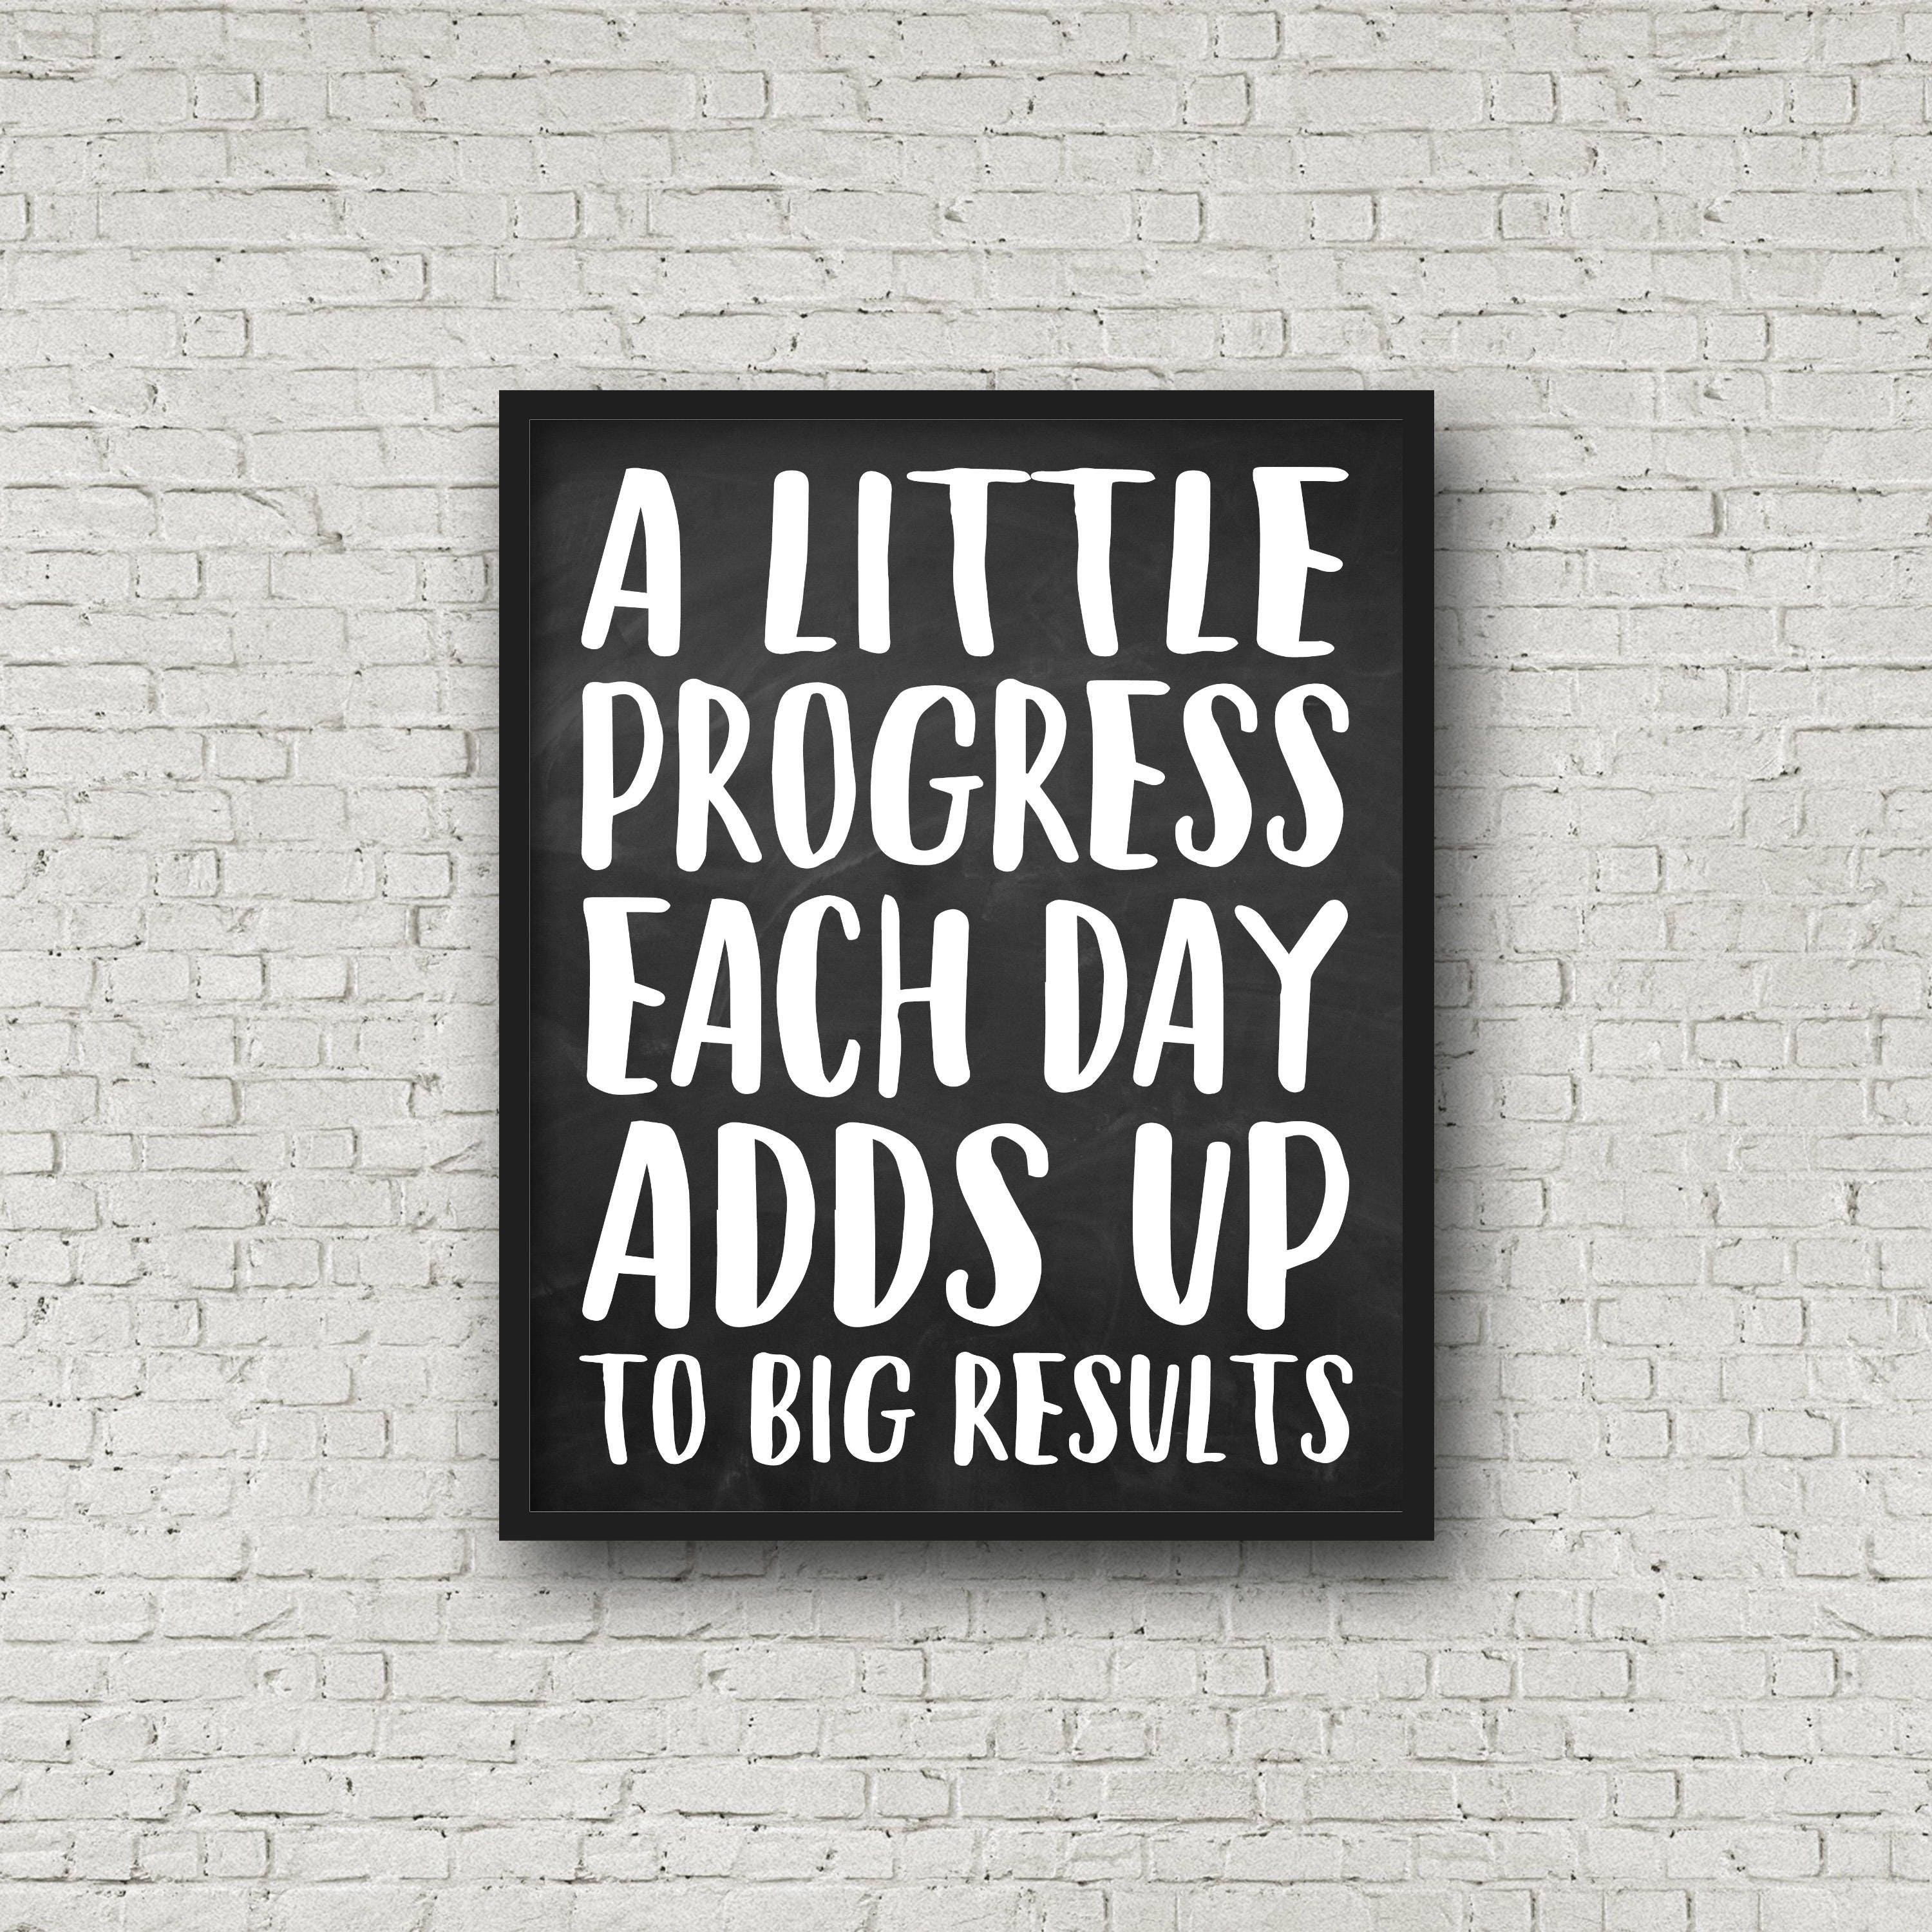 Big result. Do something great. A little progress each Day adds up to big Results. Do progress.